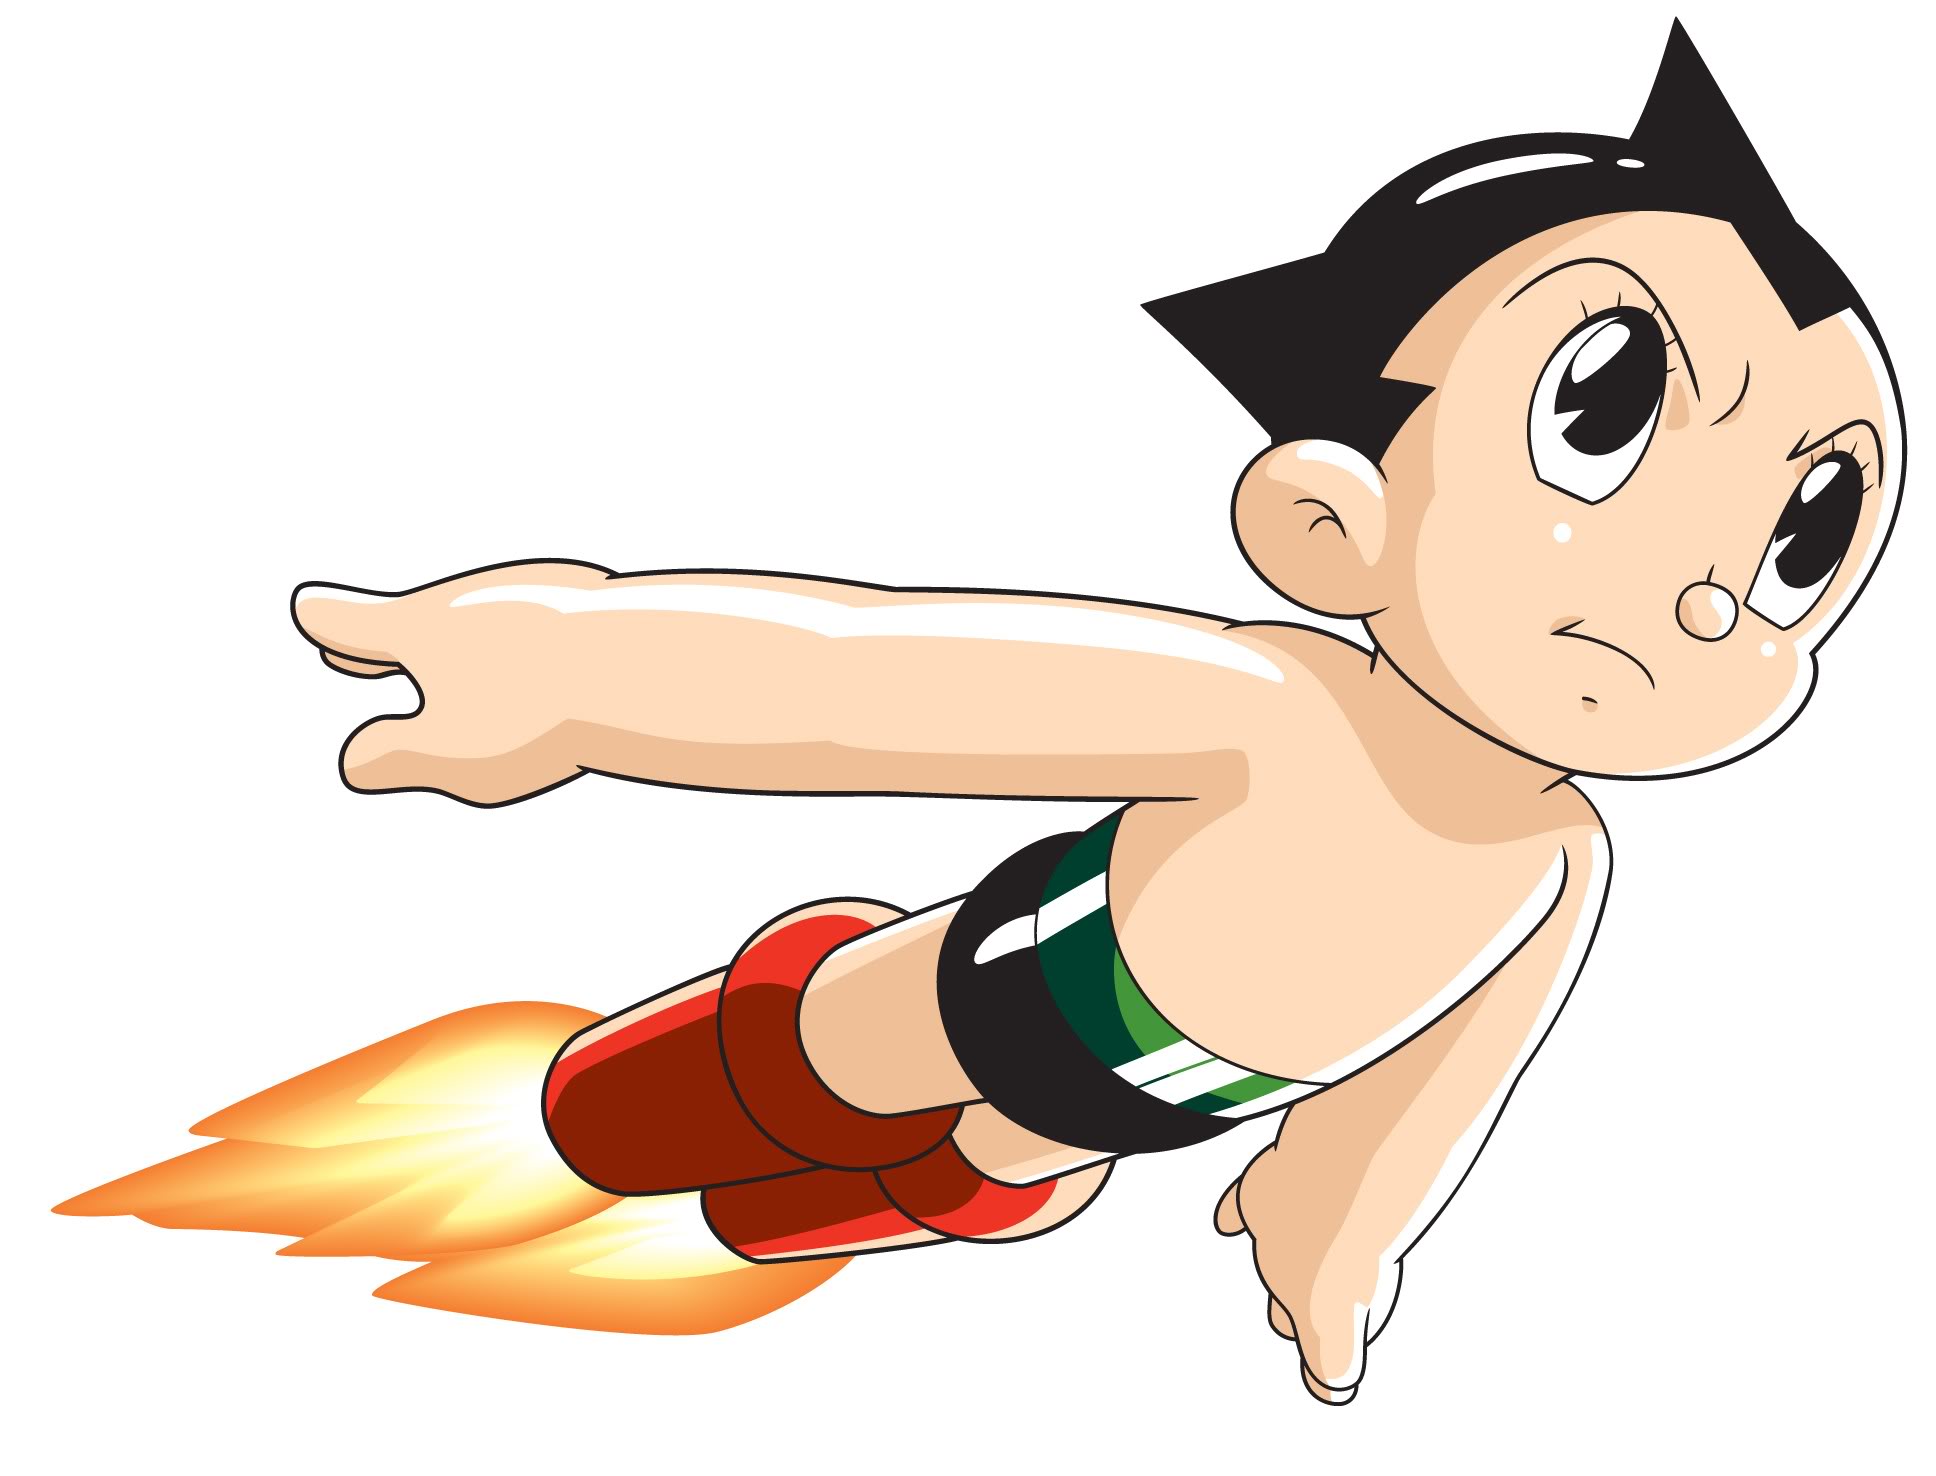 Astro Boy HD Wallpaper for PC   Cartoons Wallpapers 1936x1476